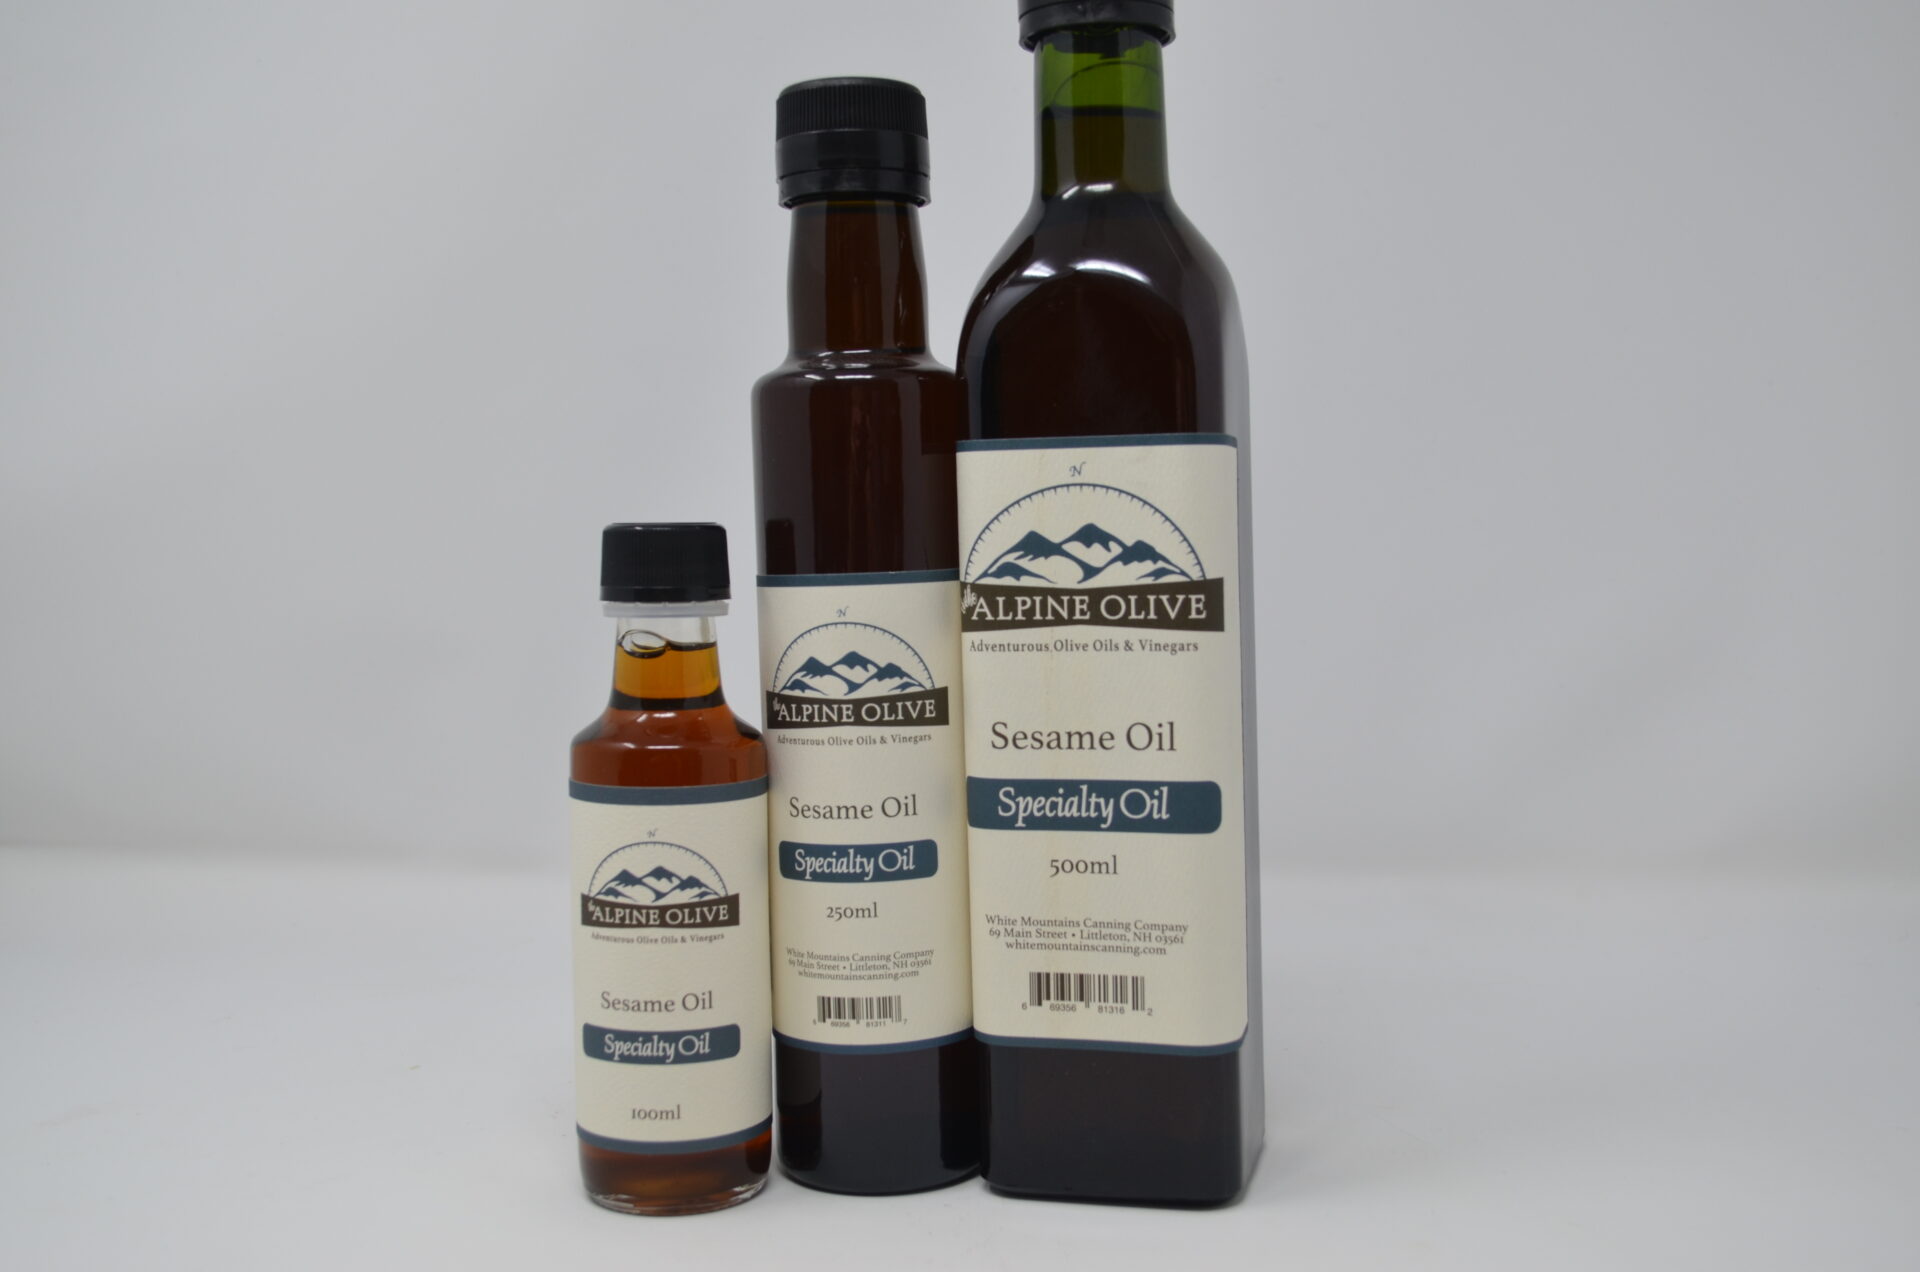 Three bottles of oil are shown on a white background.